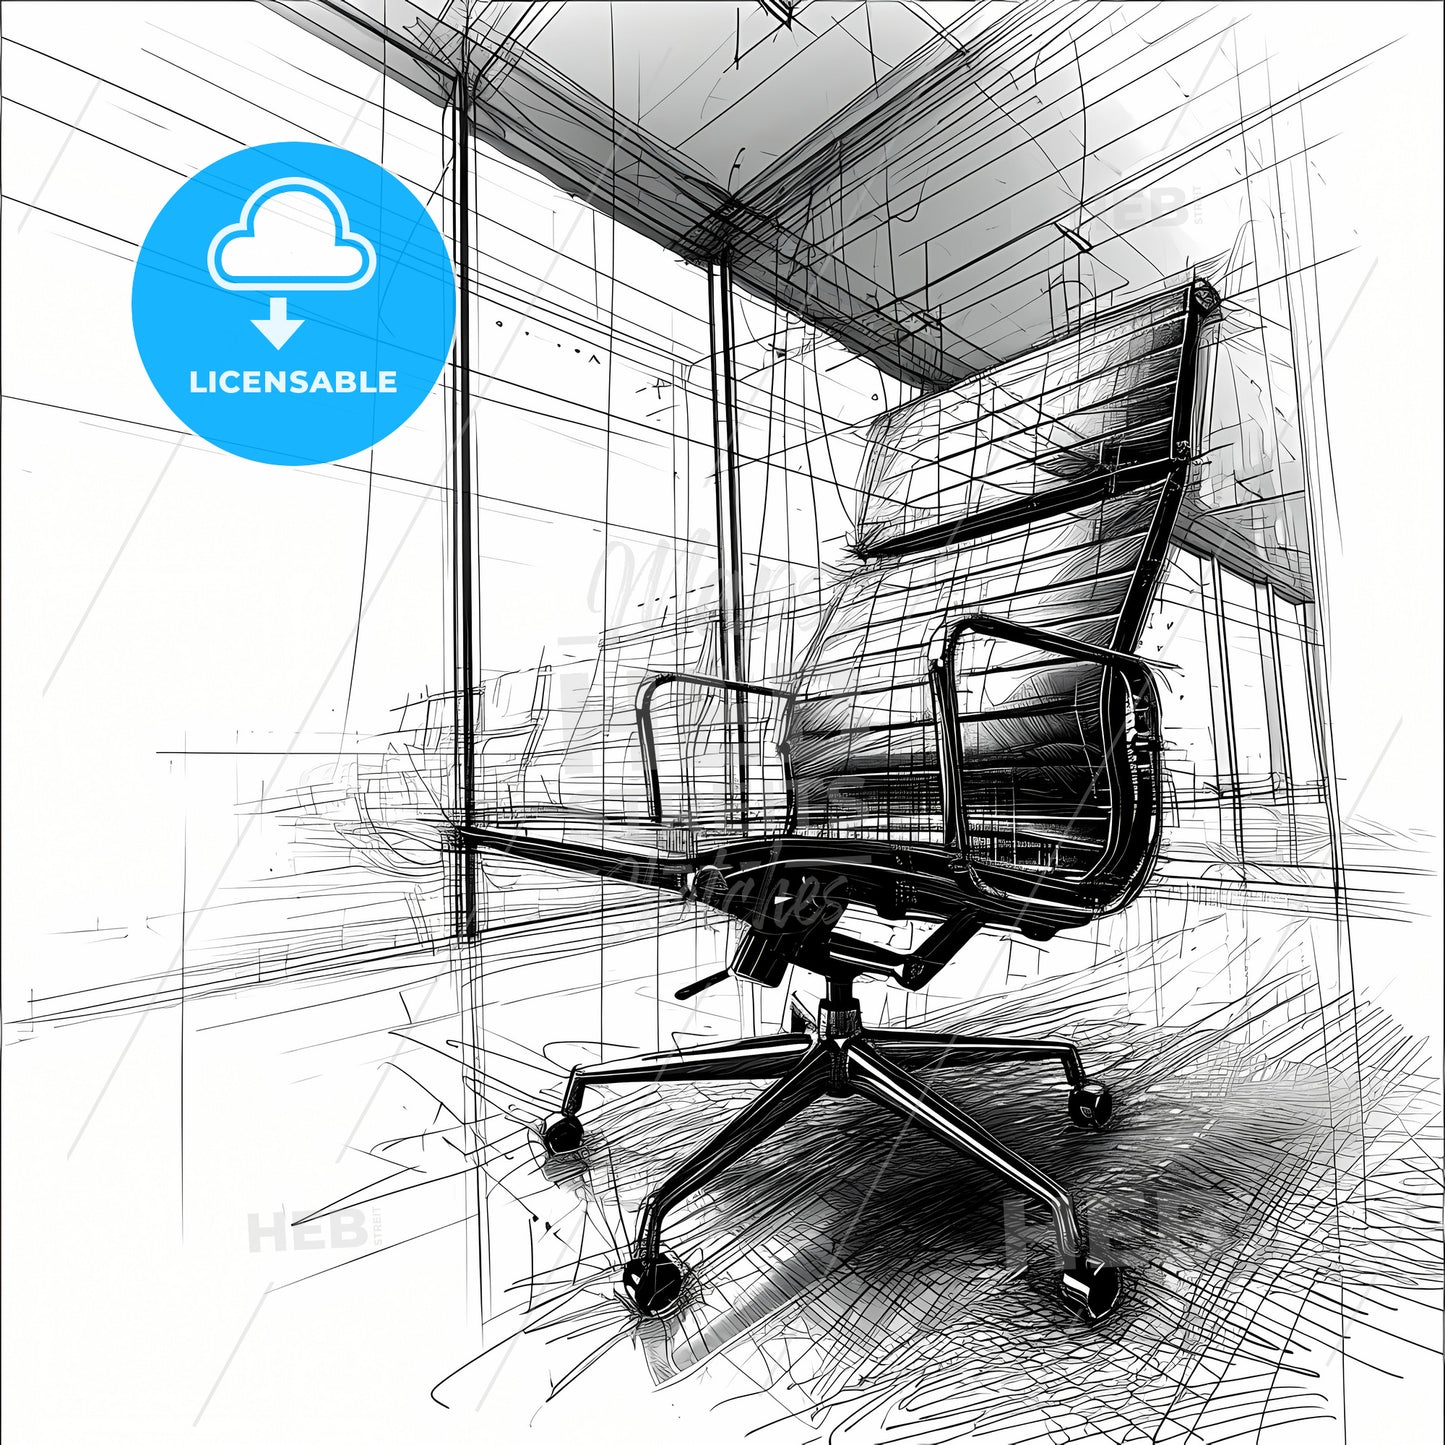 Pencil Hand-Drawn Sketch Of An Office Chair, A Chair In A Room